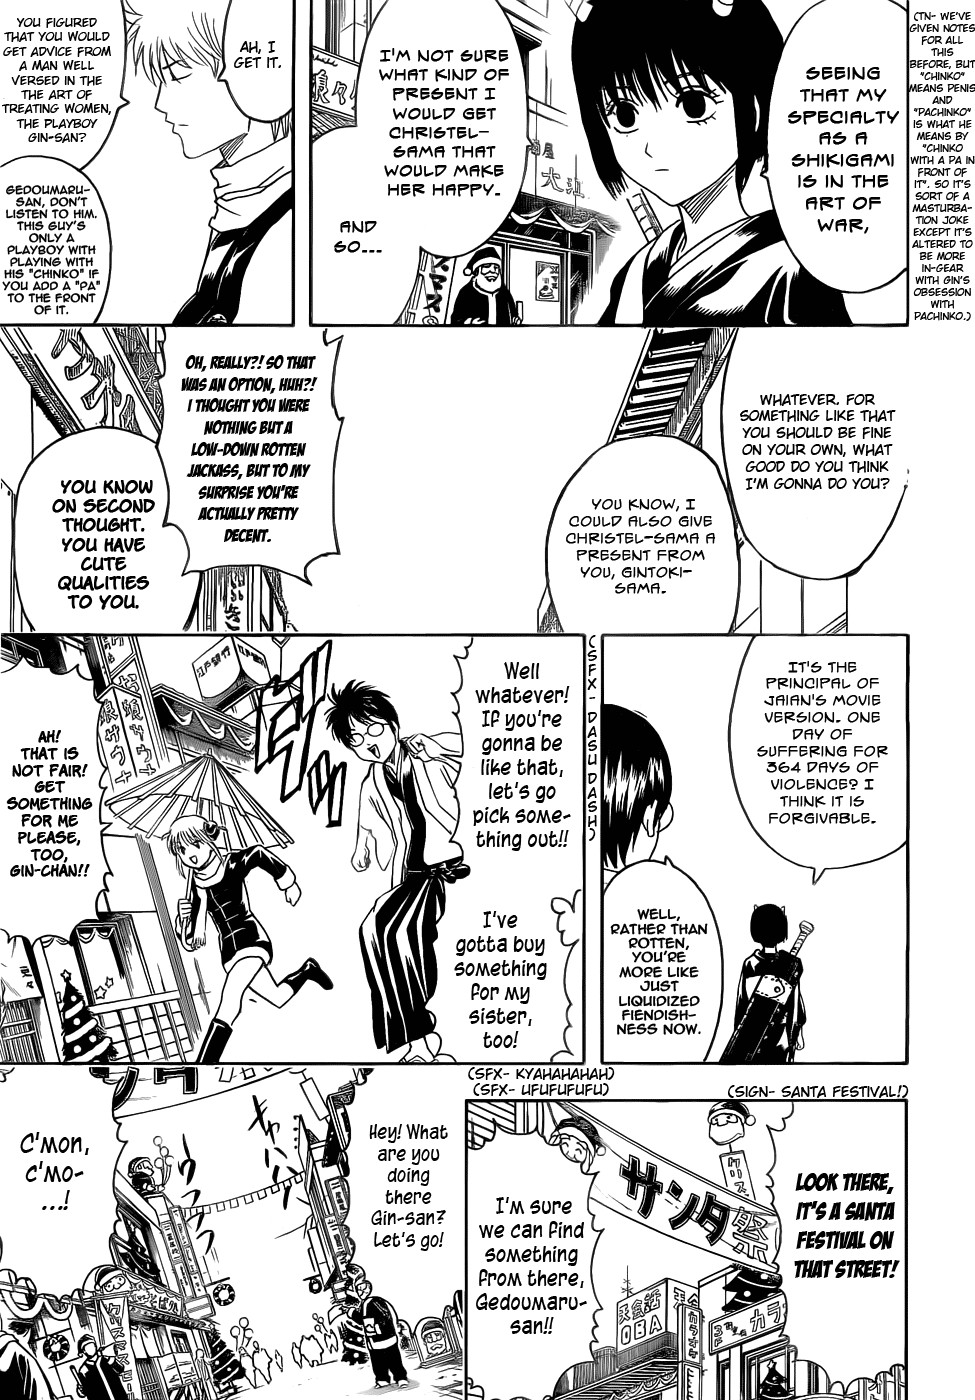 Gintama chapter 381 page 6